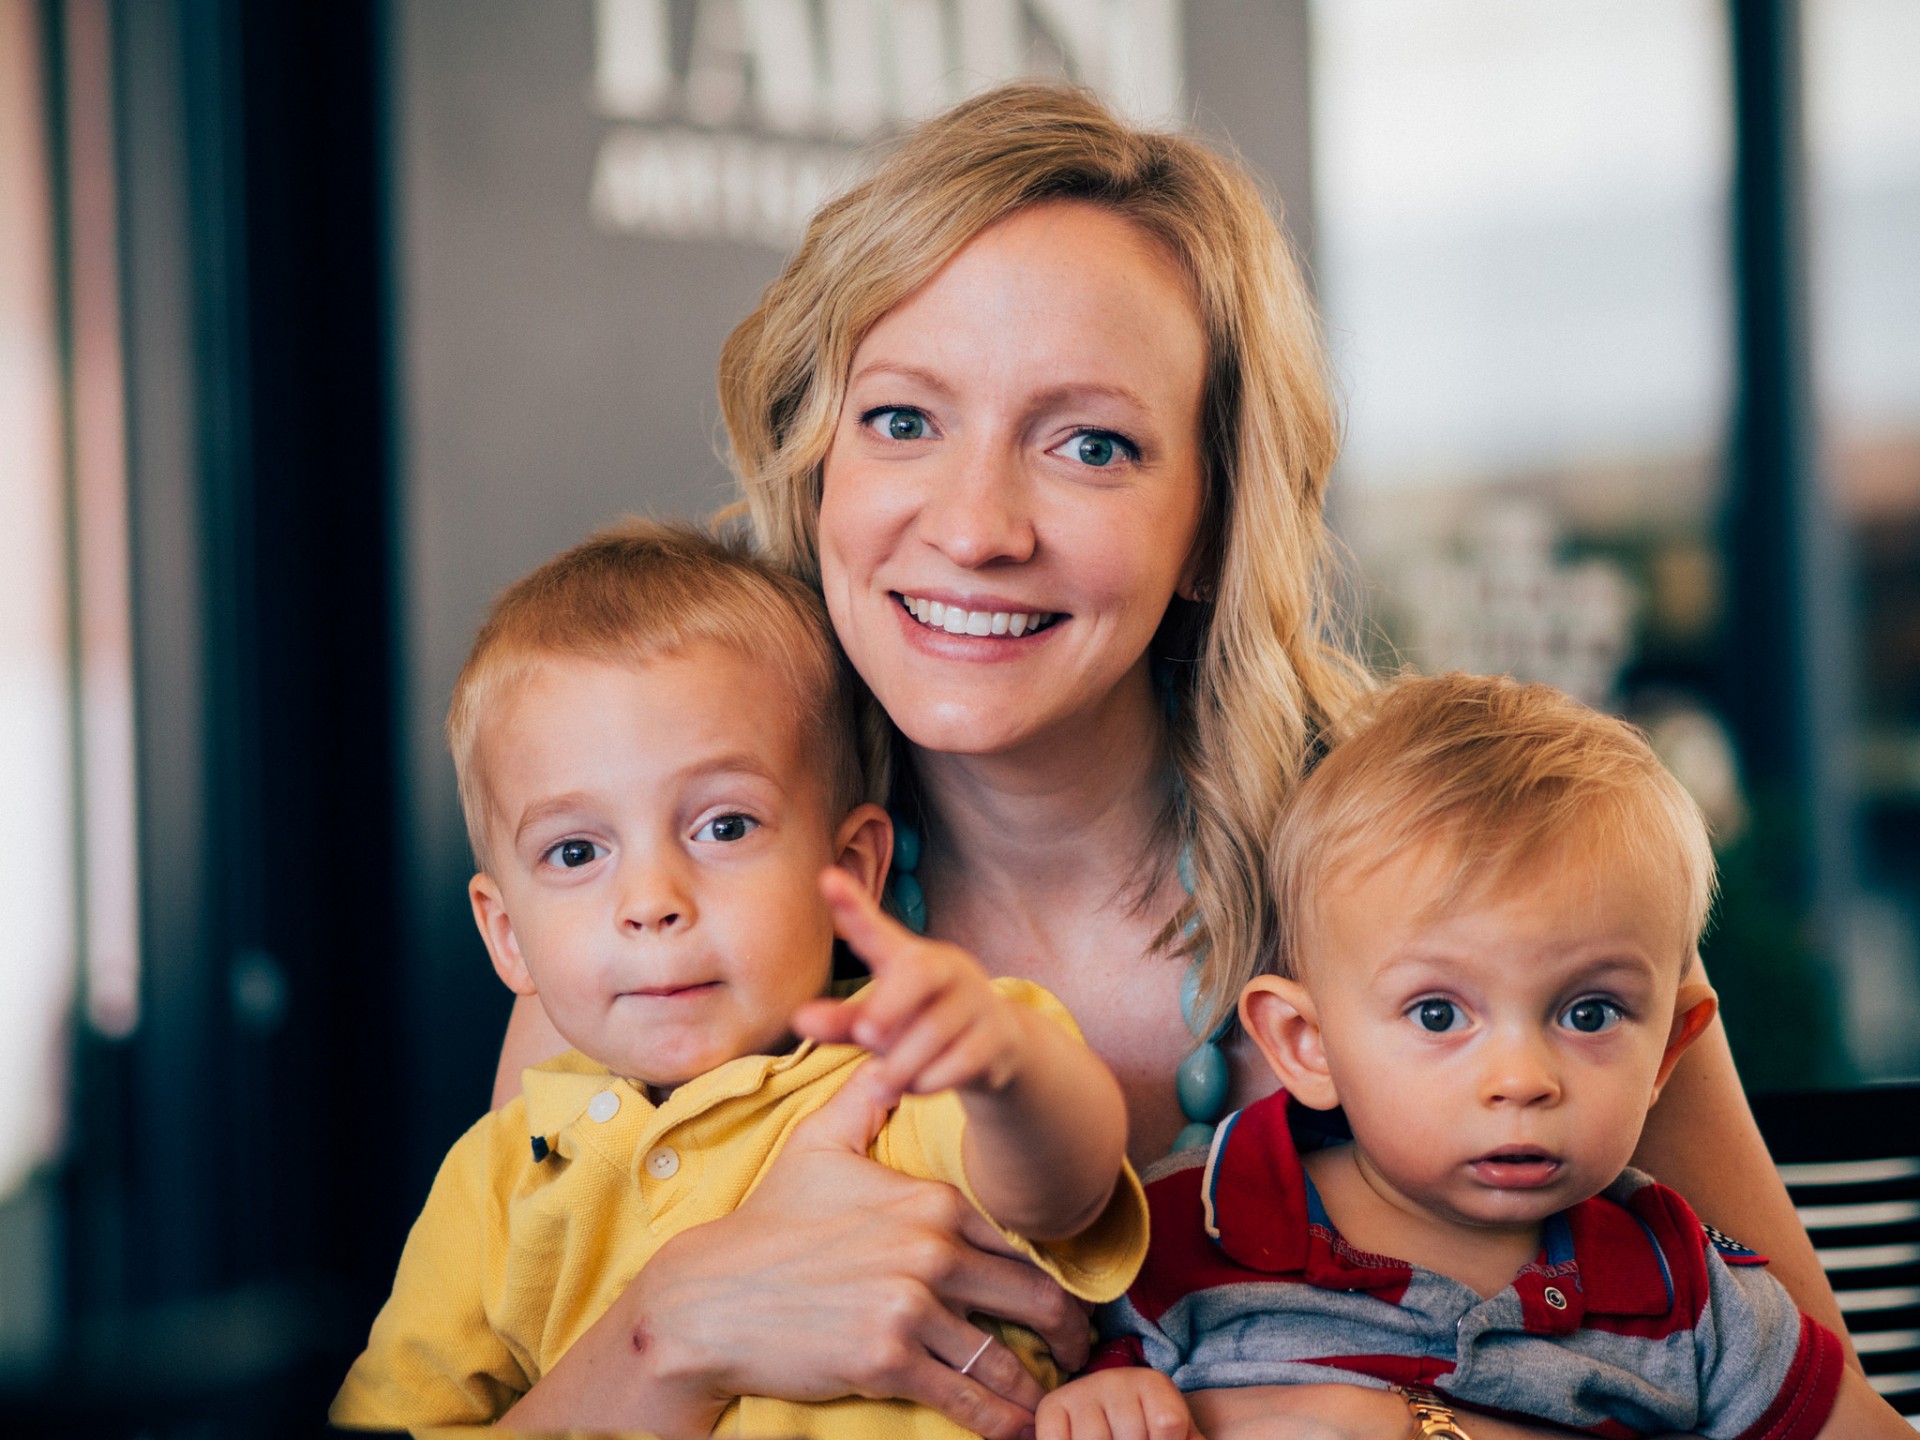 My wife and two boys. Photo taken with the E-M10 and the Olympus 75mm 1.8 lens.